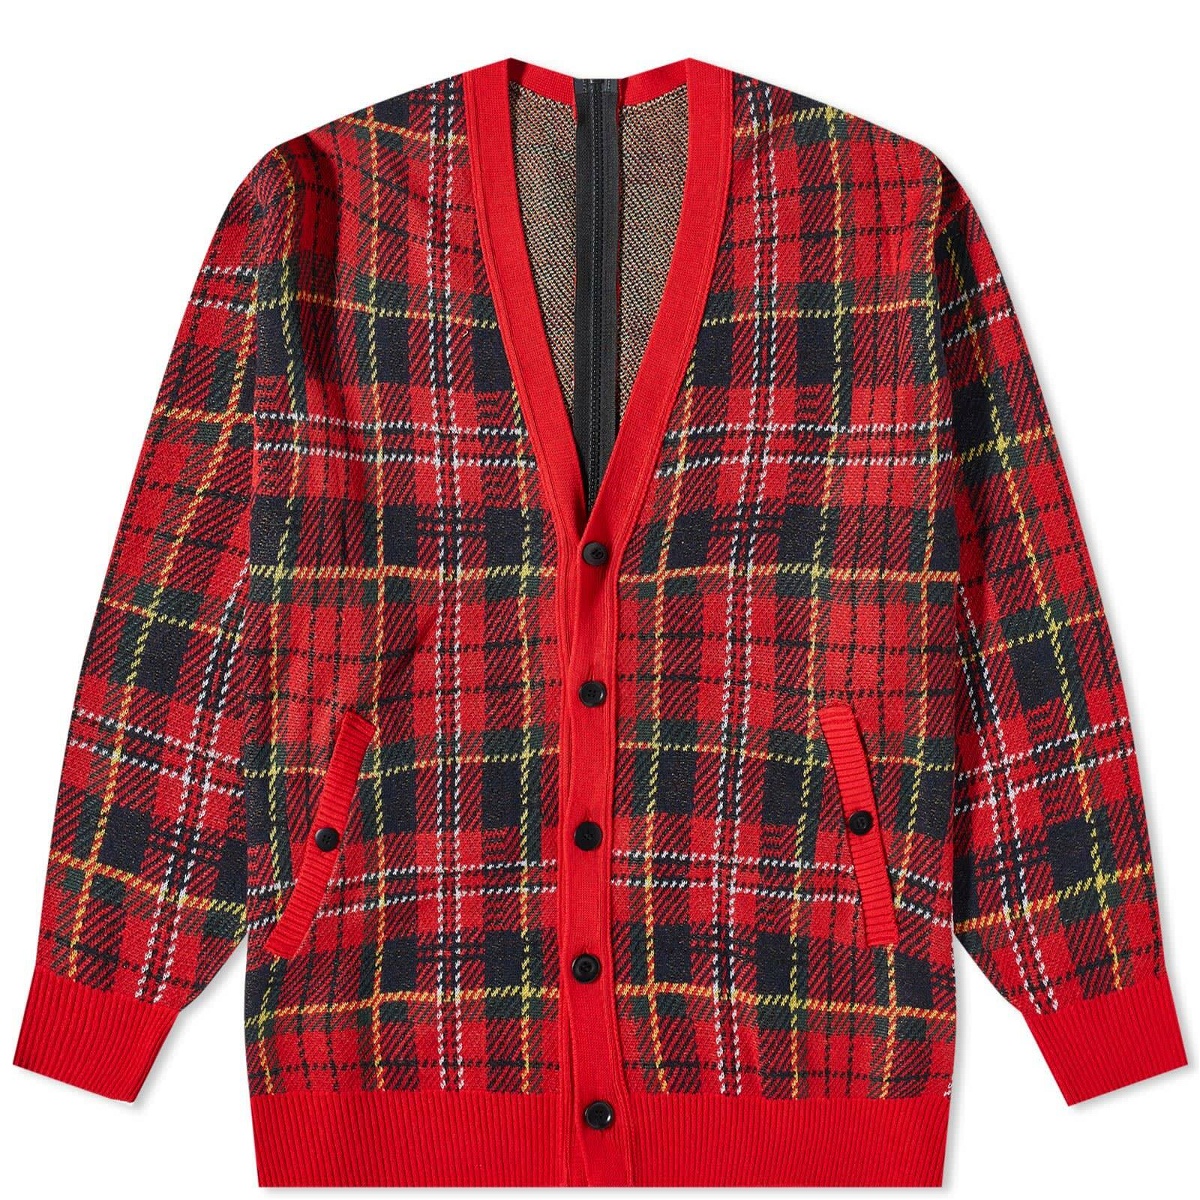 Undercover Men's Cardigan in Red Check Undercover